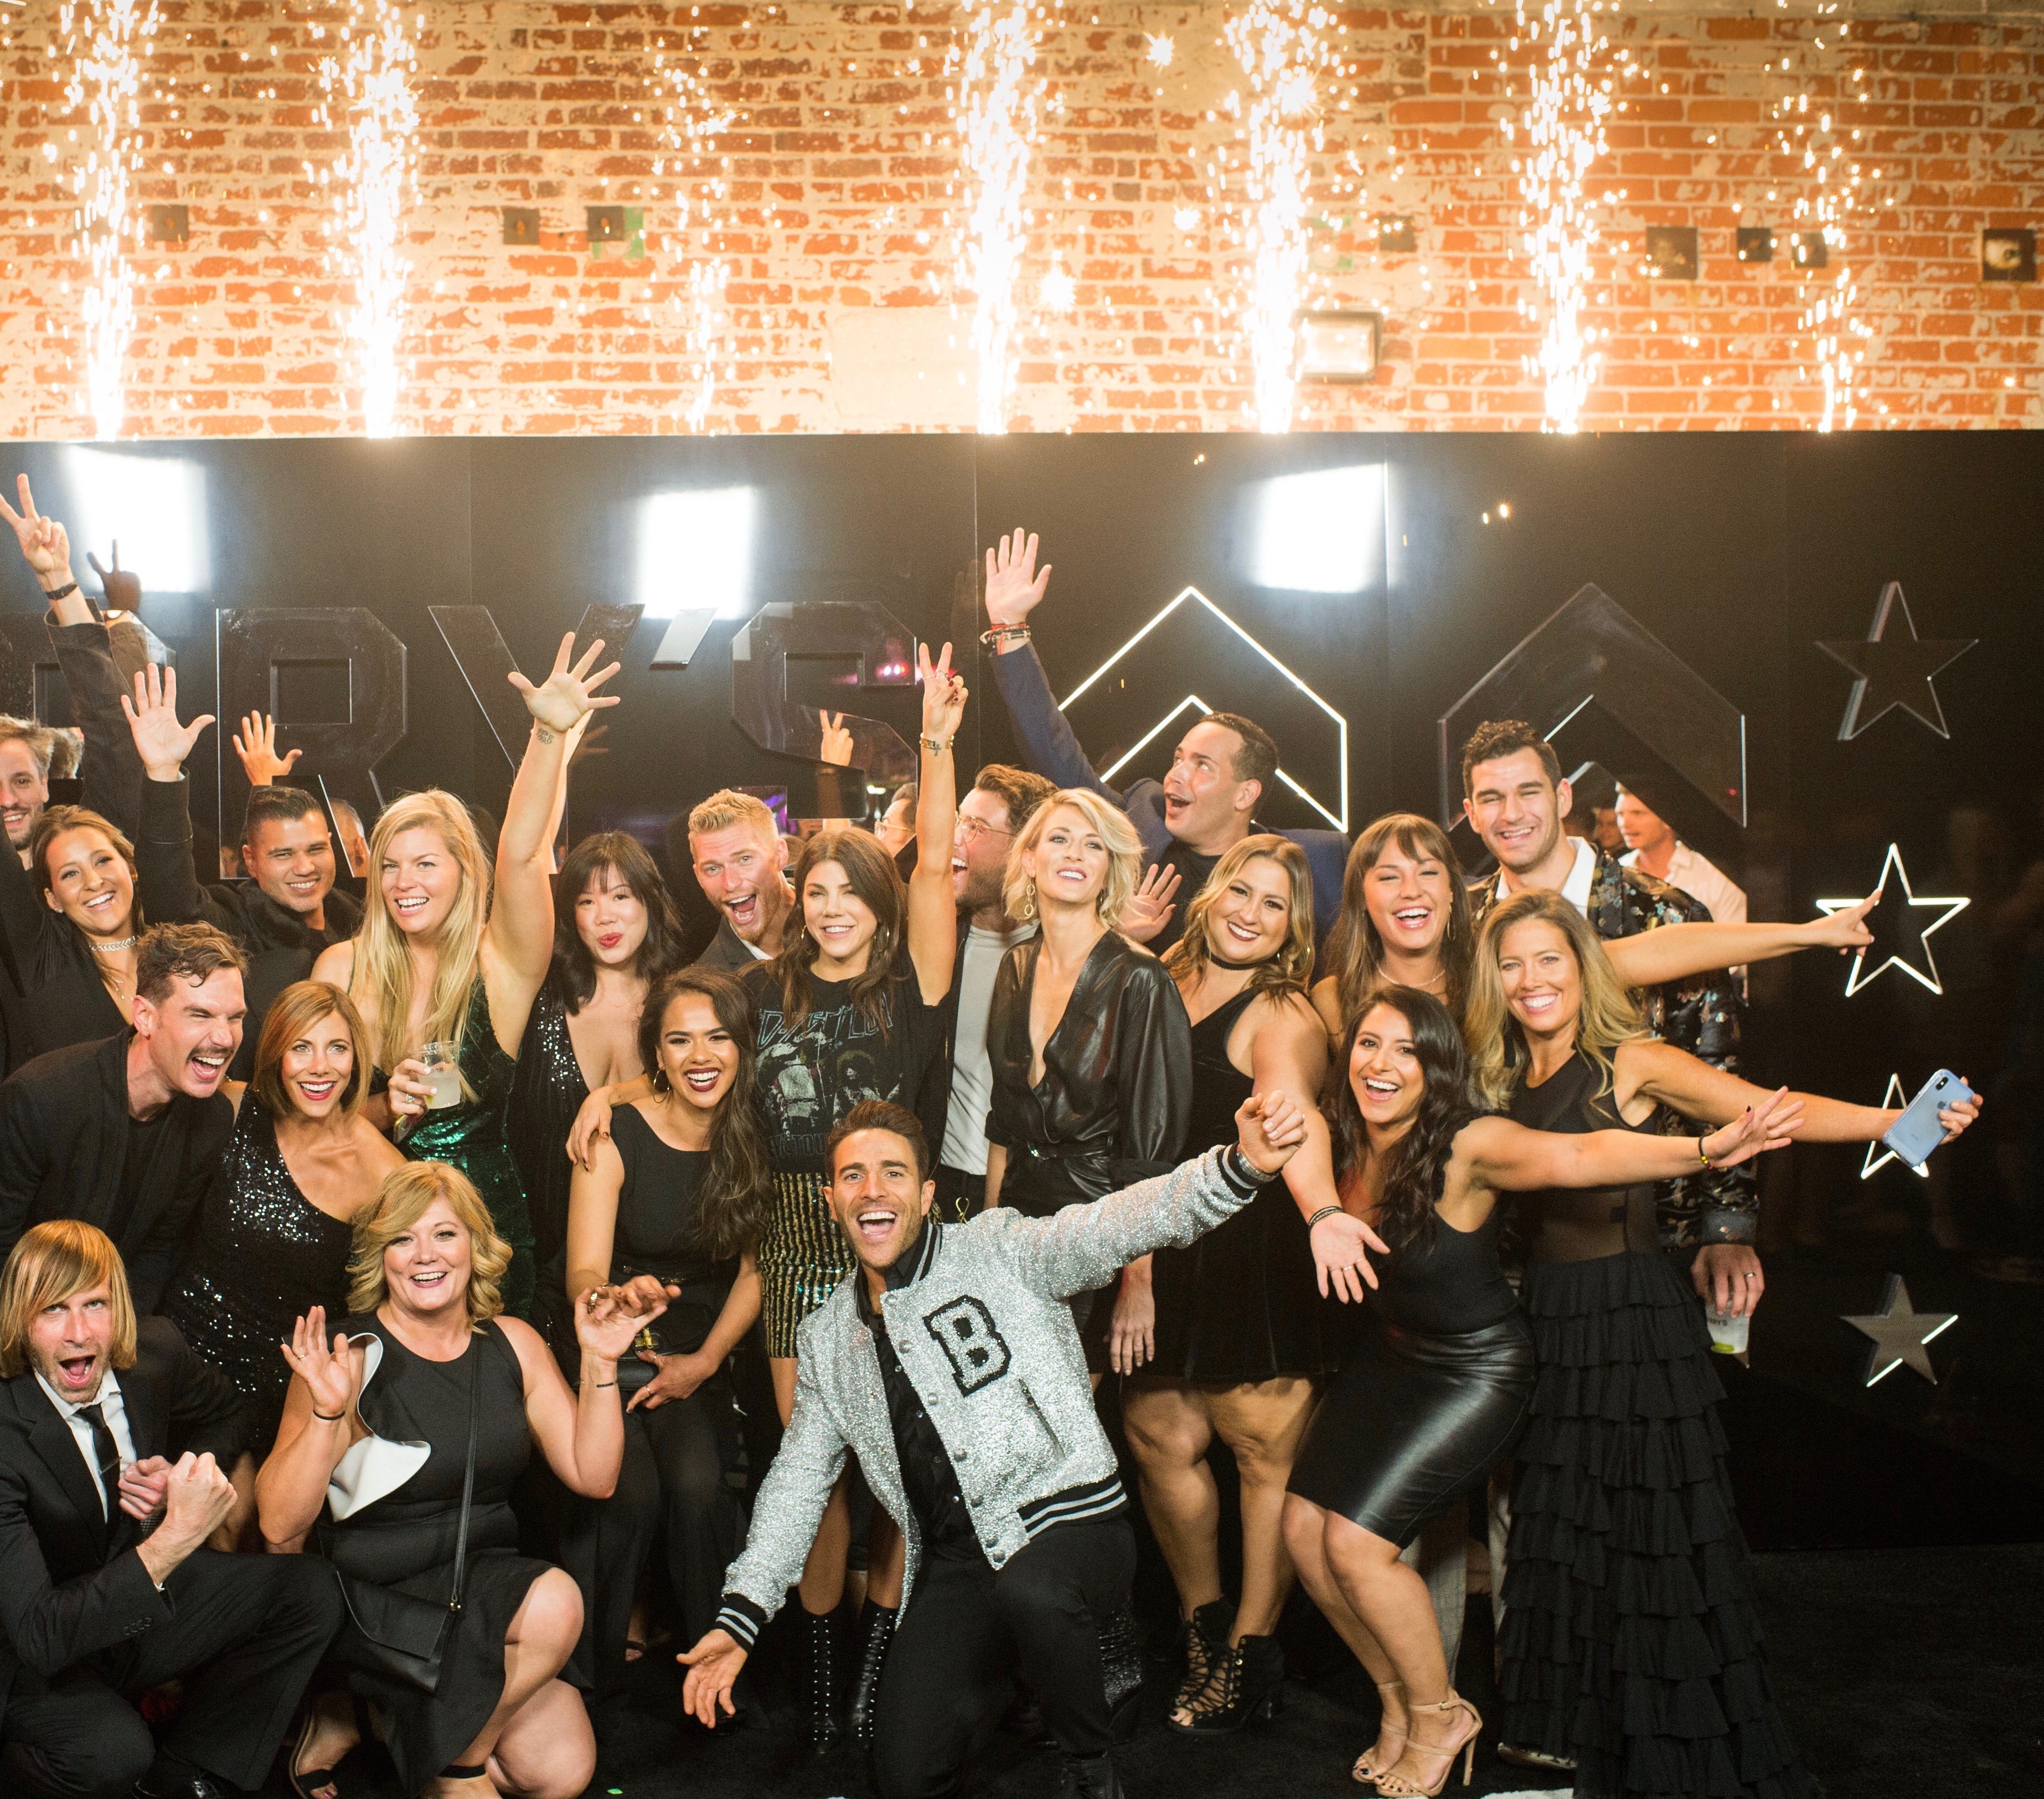 Barry's Bootcamp team dressed in semi-formal black attire smiling with arms outstretched in front of wall with sparklers 